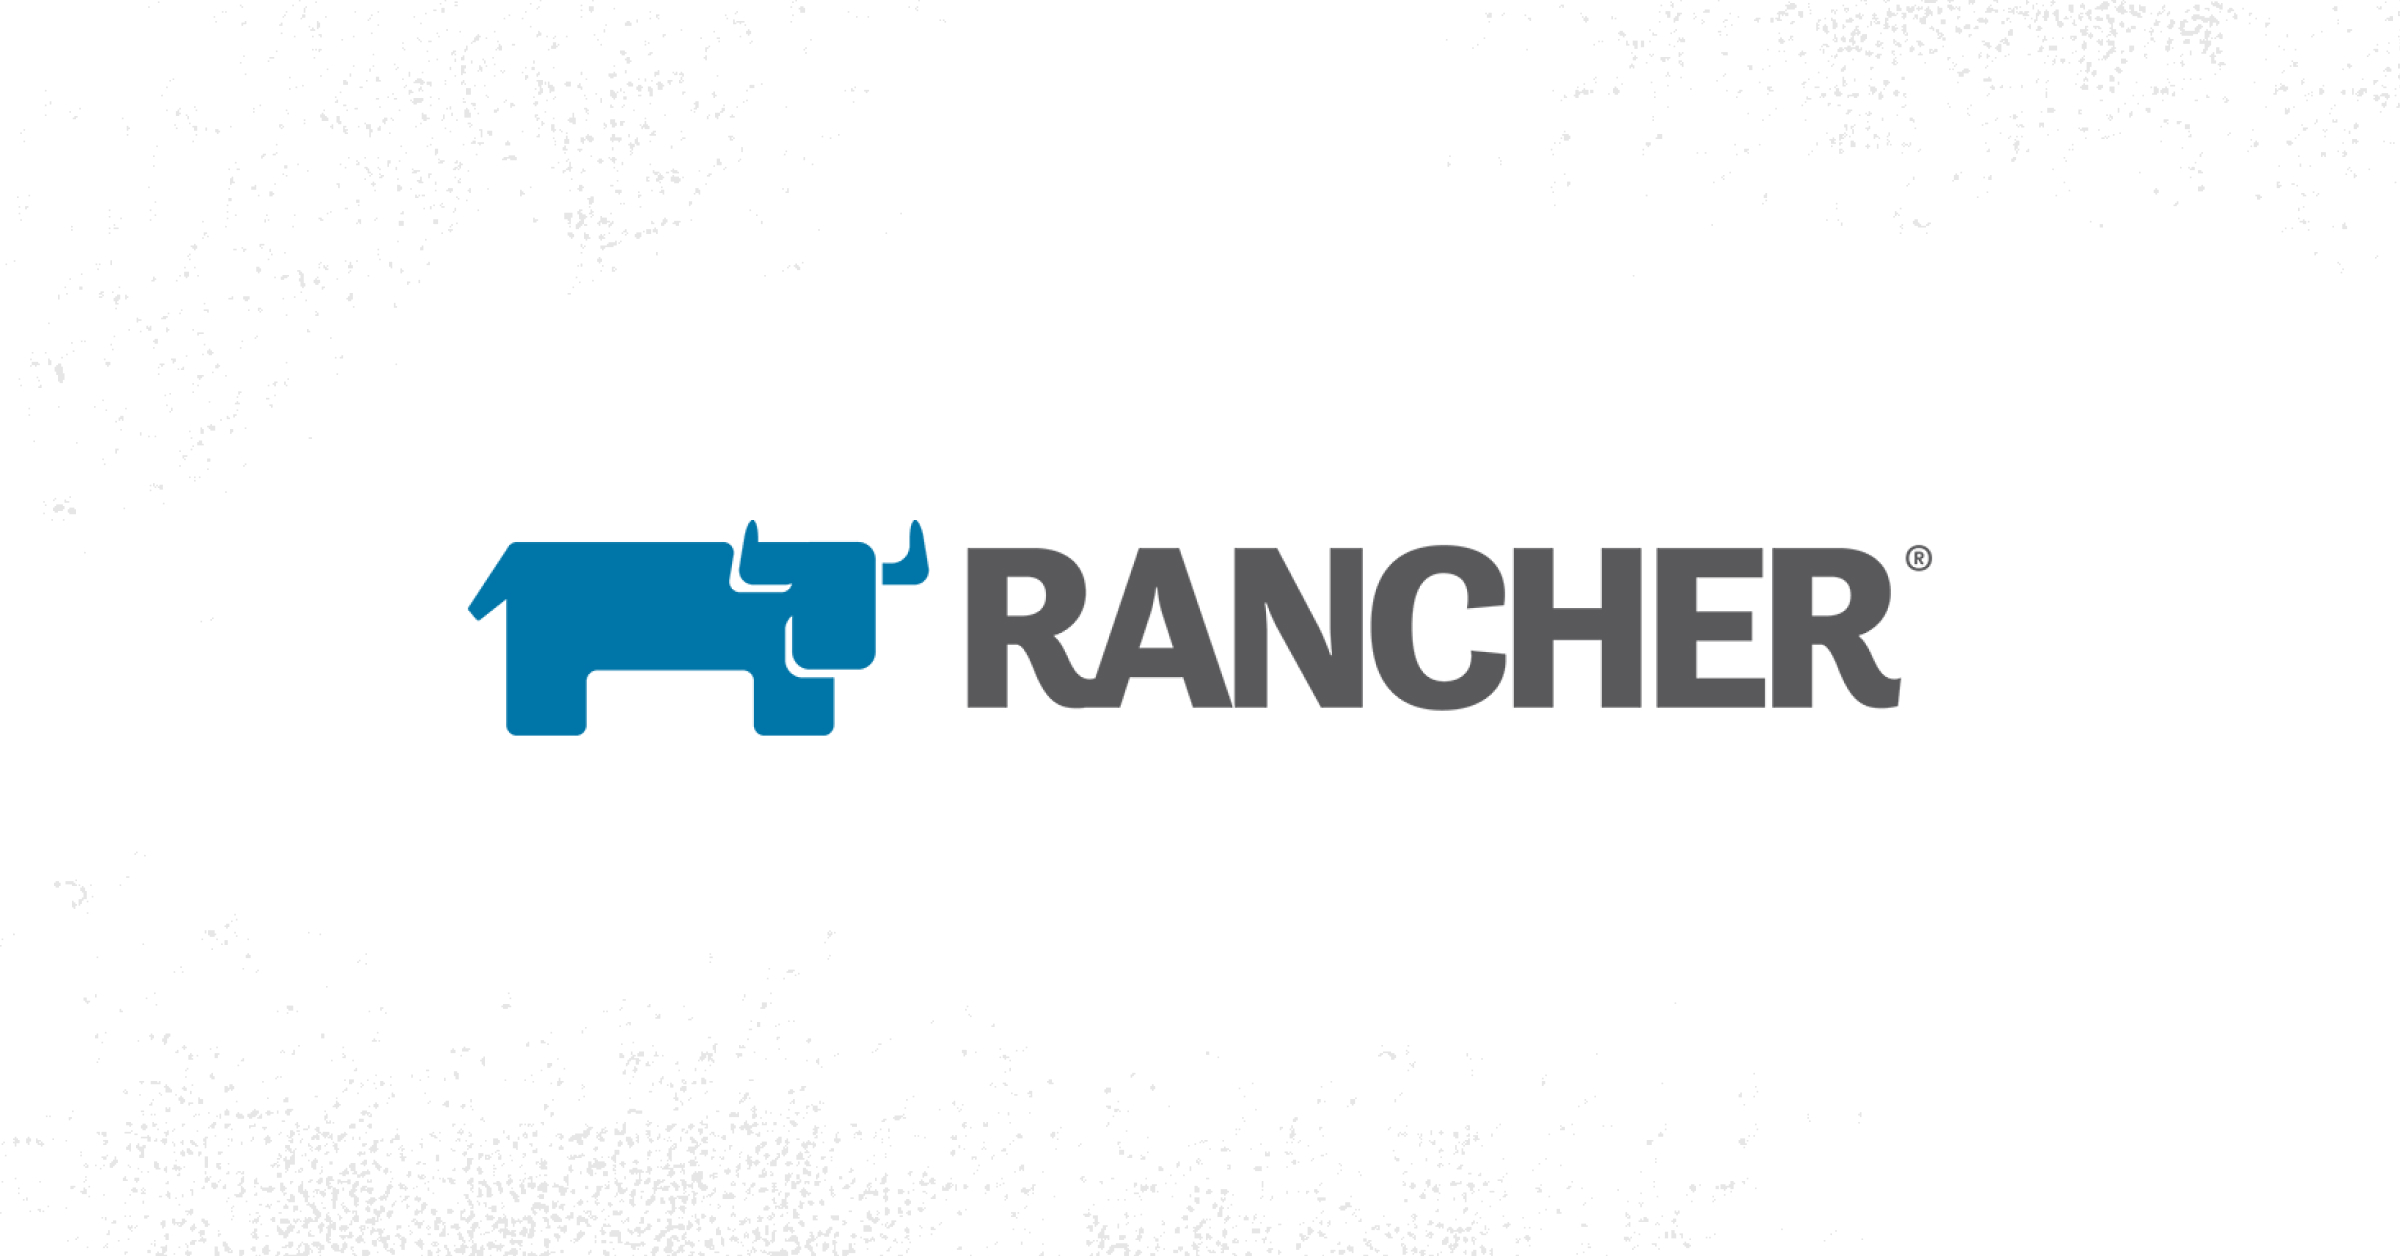 SUSE Rancher